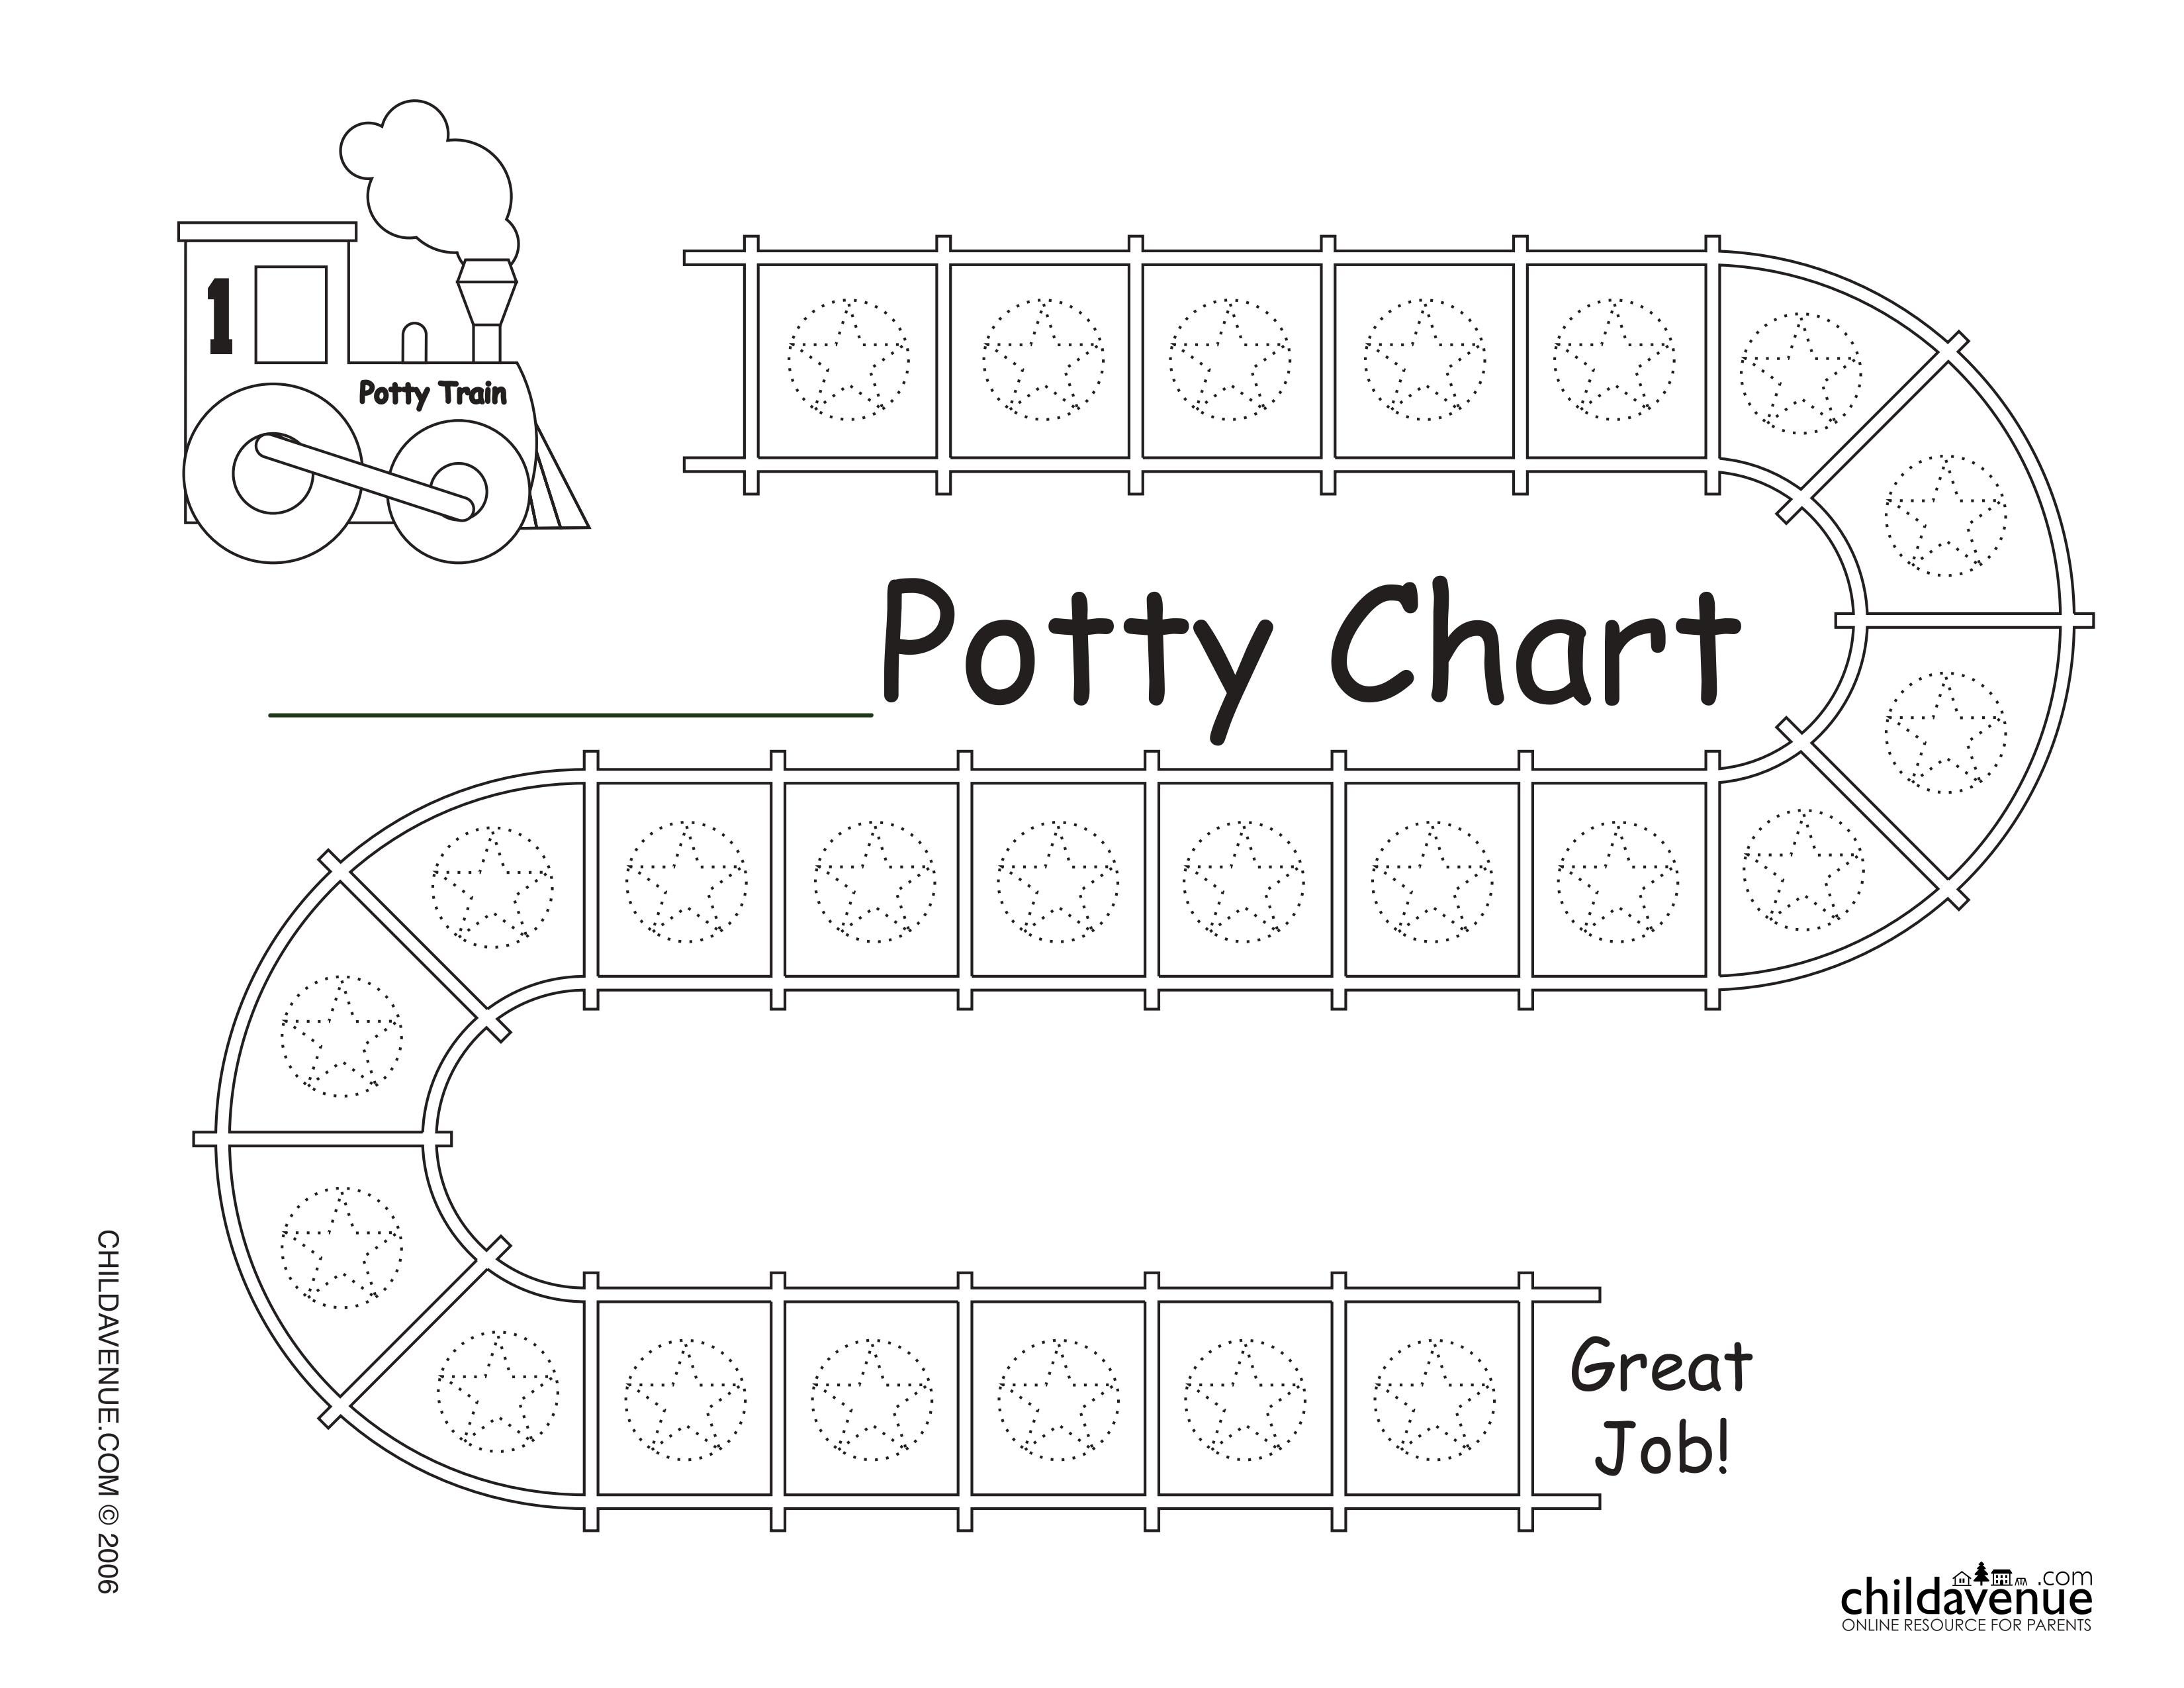 free-and-printable-potty-charts-for-kids-101-activity